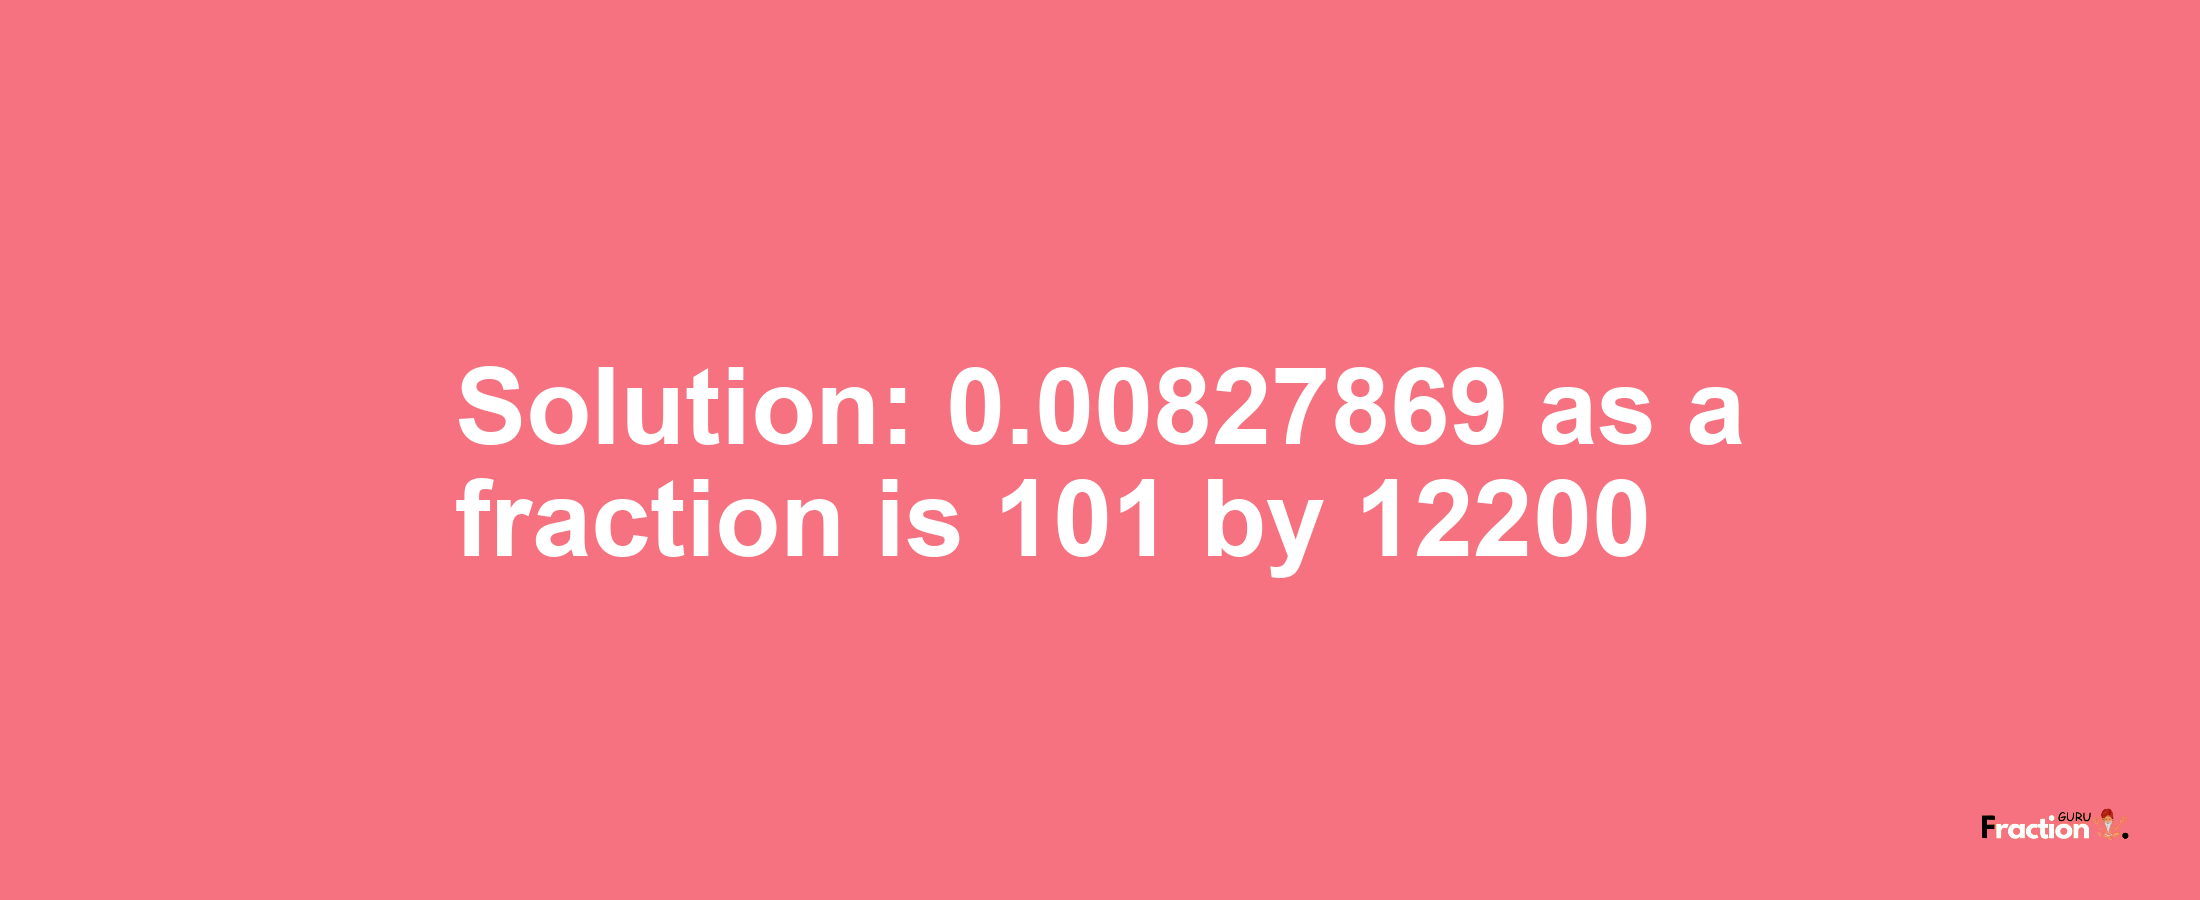 Solution:0.00827869 as a fraction is 101/12200